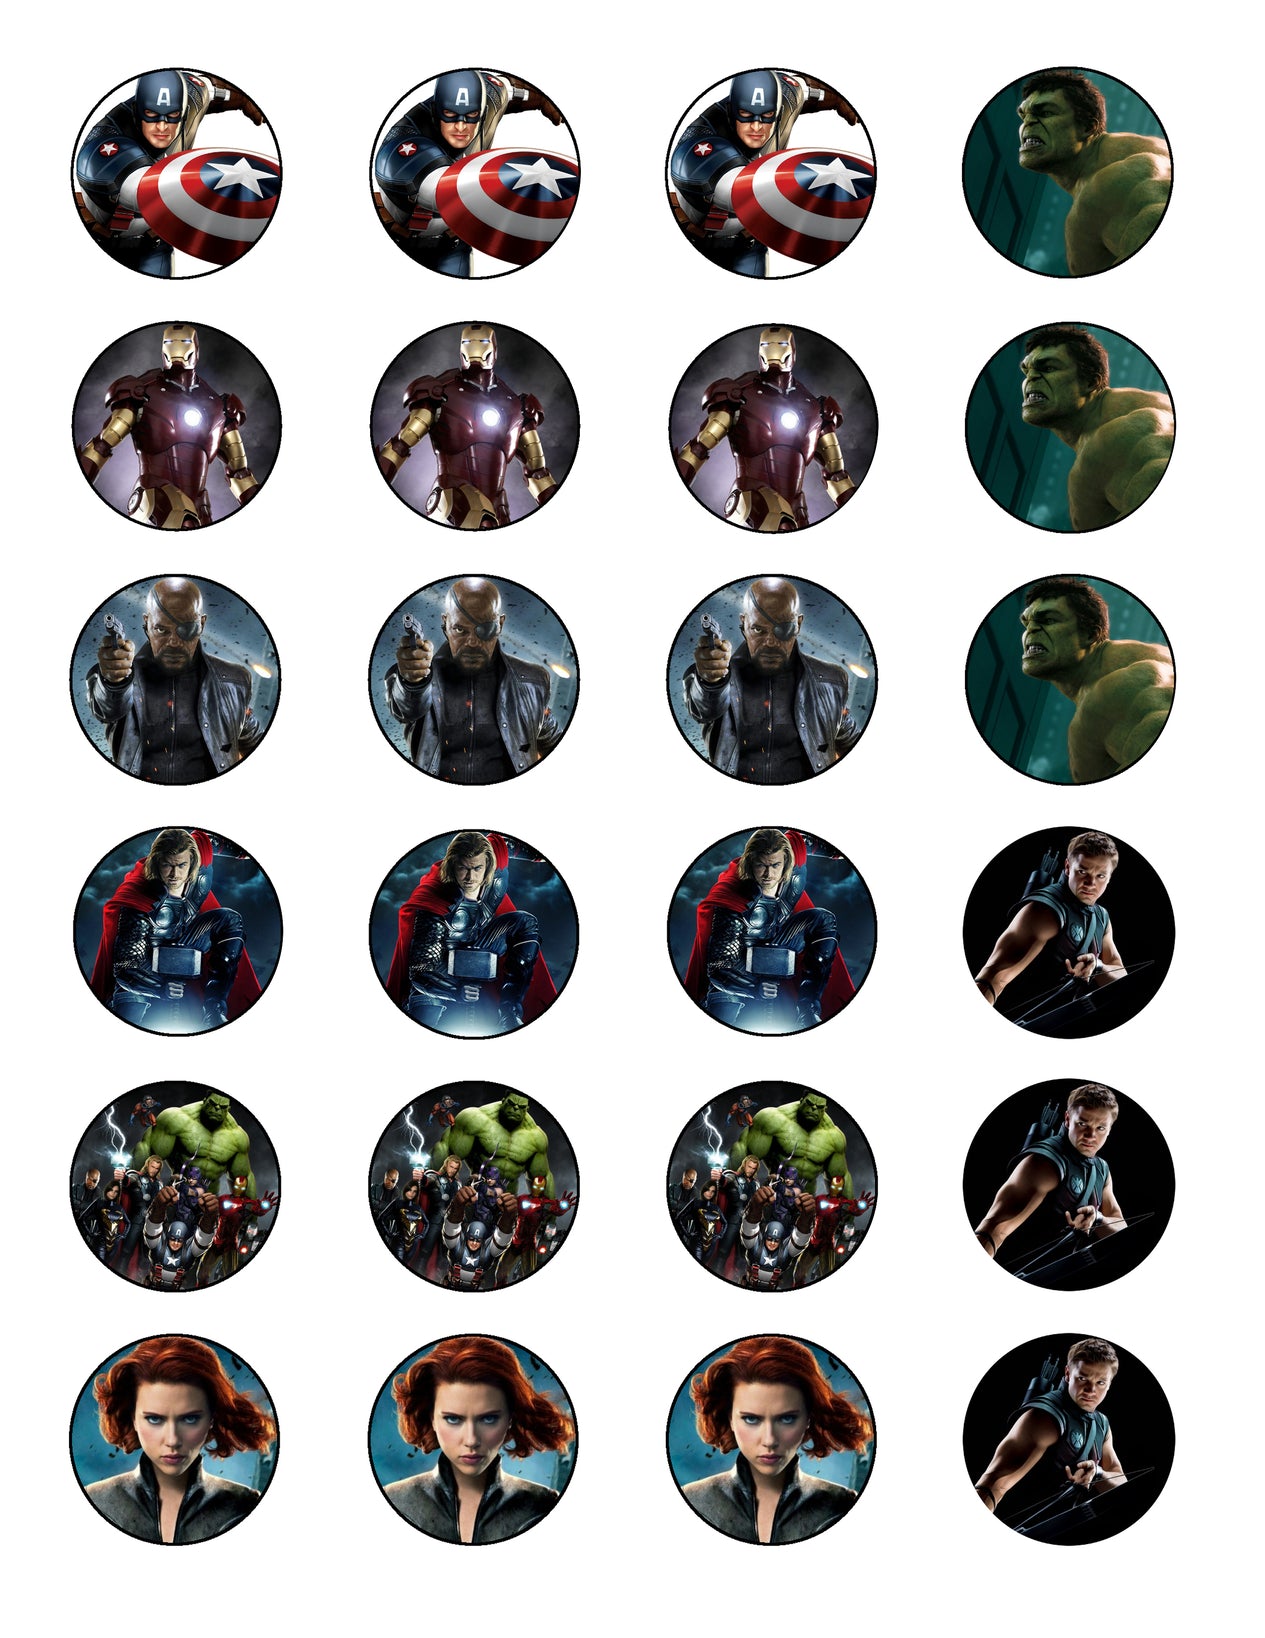 Marvel Avengers Captain America the Hulk Iron Man Thor Black Widow Edible Cupcake Topper Images ABPID07070